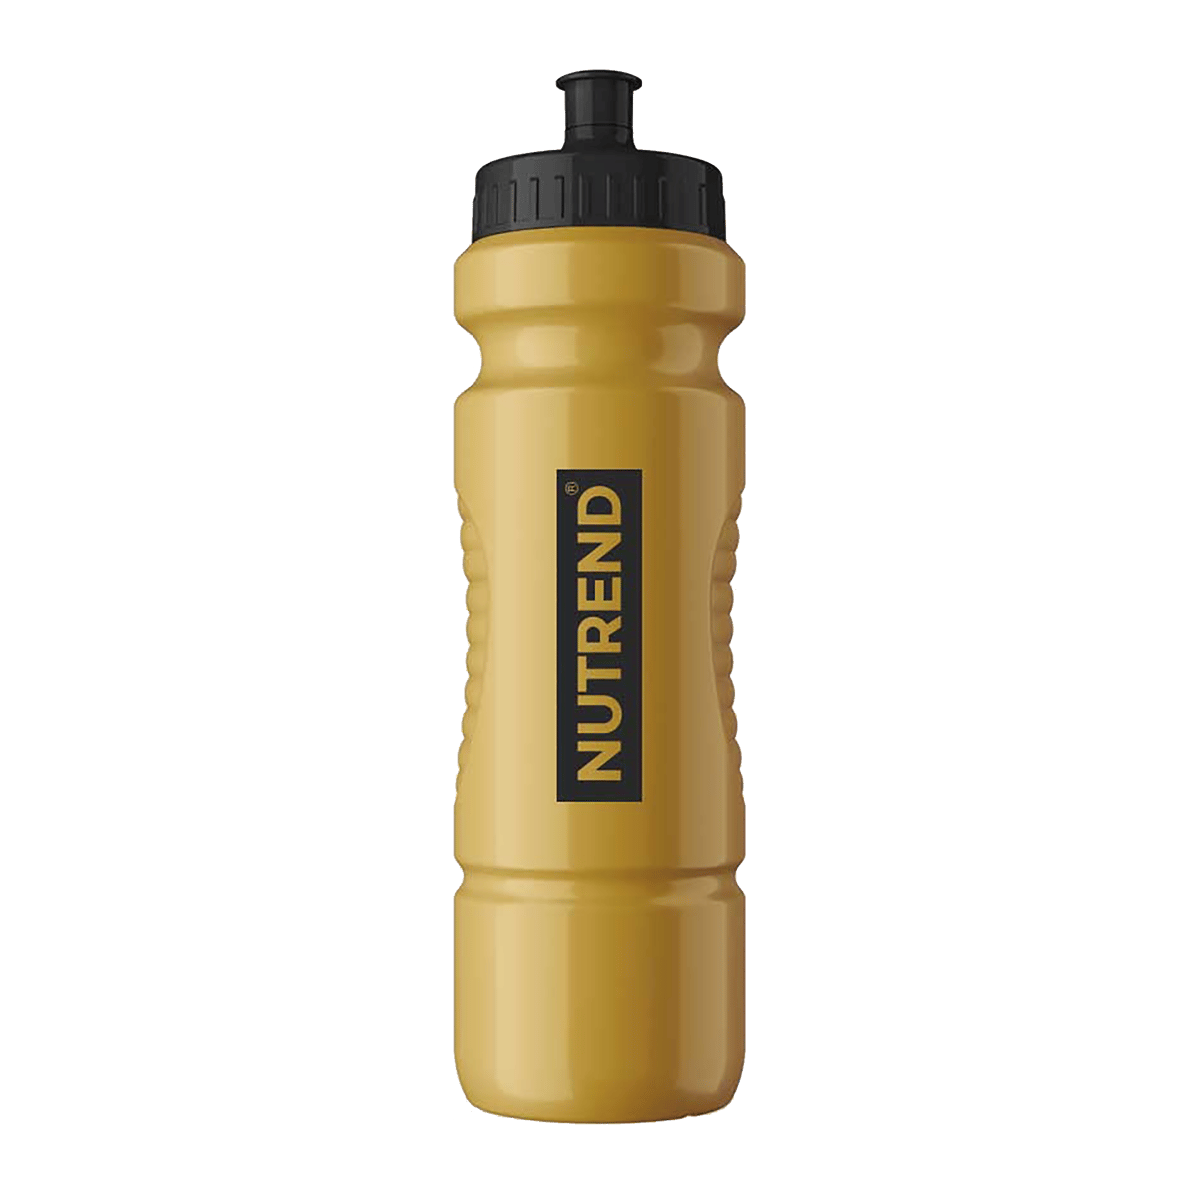 Sports Bottle One Brand, All Sports #1